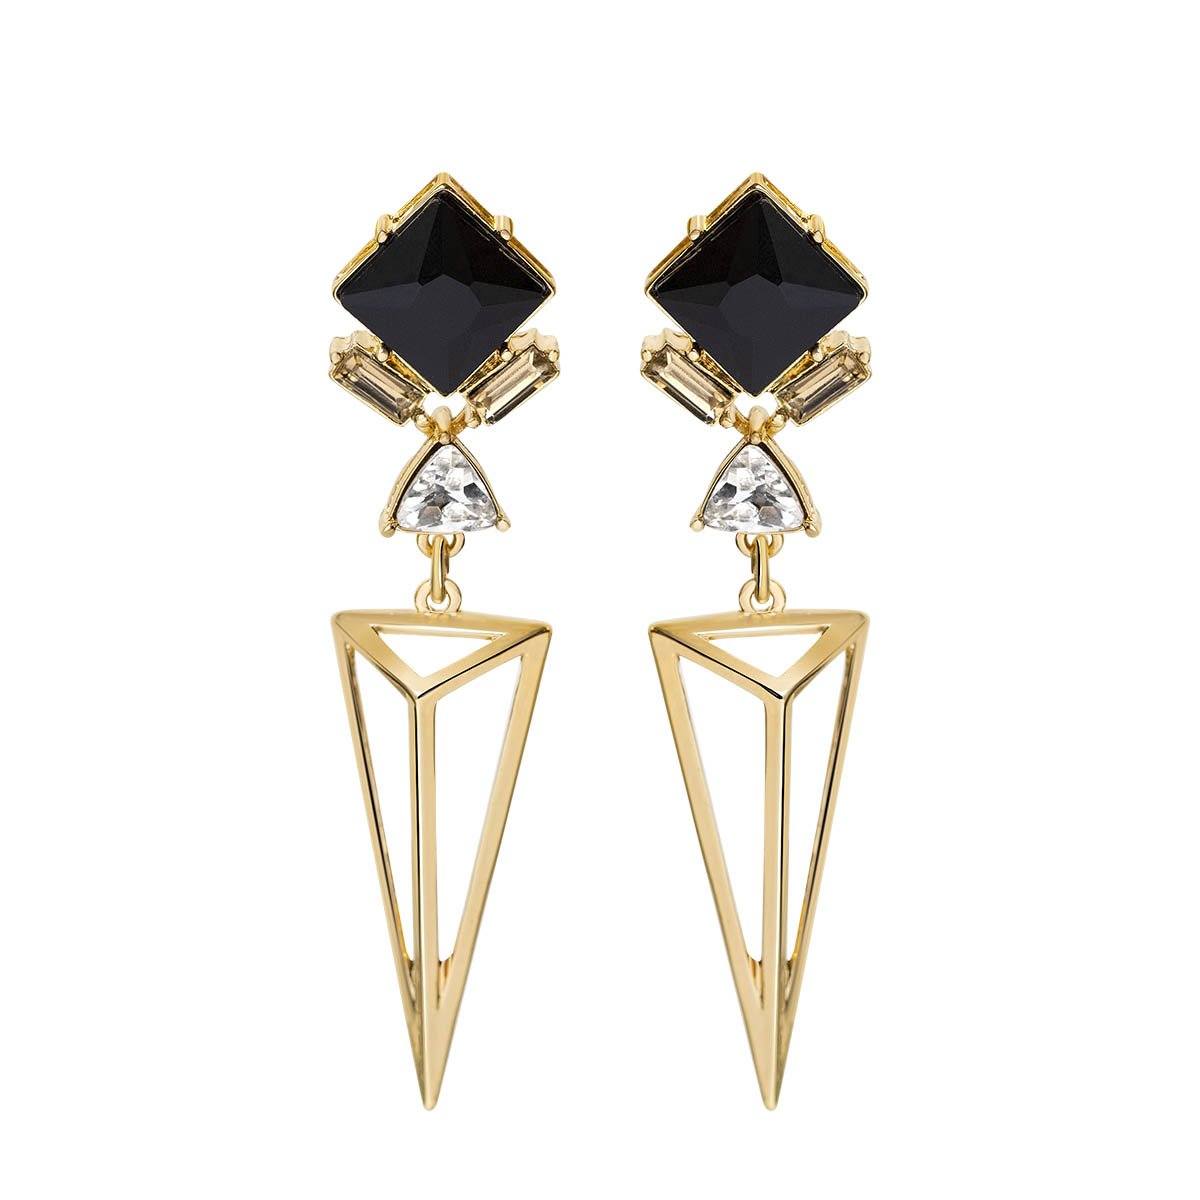 Art Deco Style Black and Gold Geometric Earrings Vinty Jewelry 